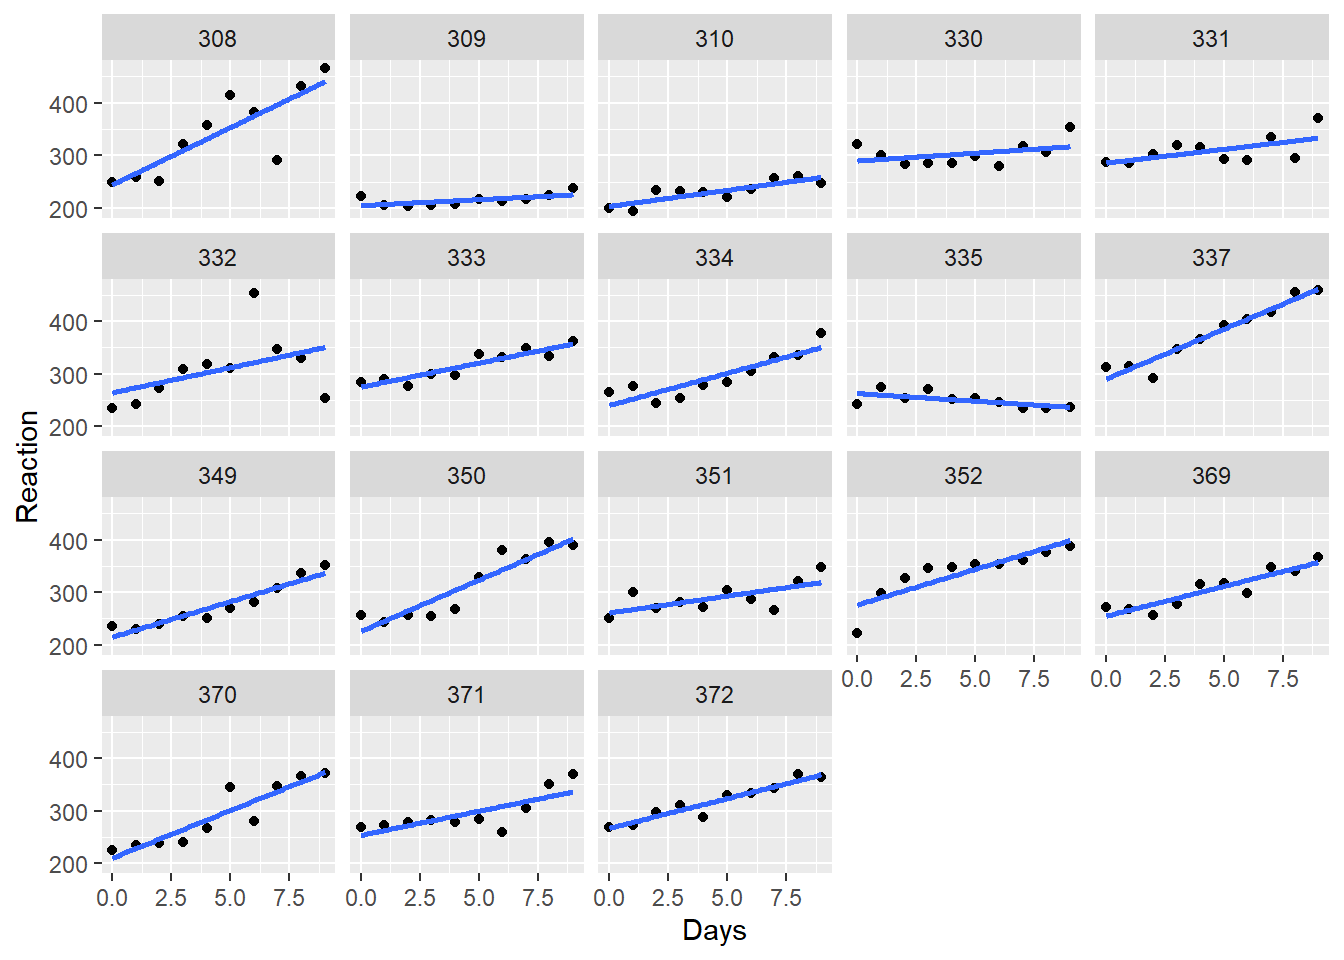 Scatter plots of reaction time versus days for each subject, with fitted linear trend line.